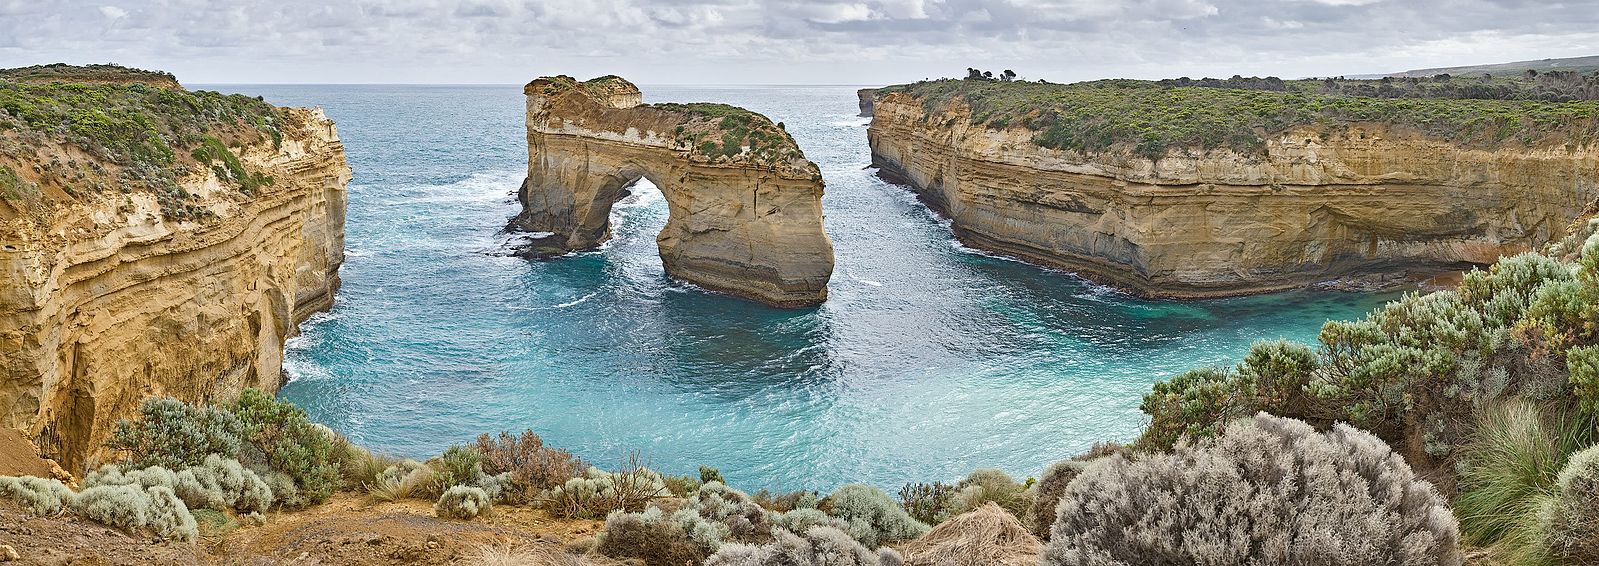 The arch is a rock formation in a cove of water with a hole in the middle which allows water to pass through; the surrounding landscape is composed of vertical tan cliffs.